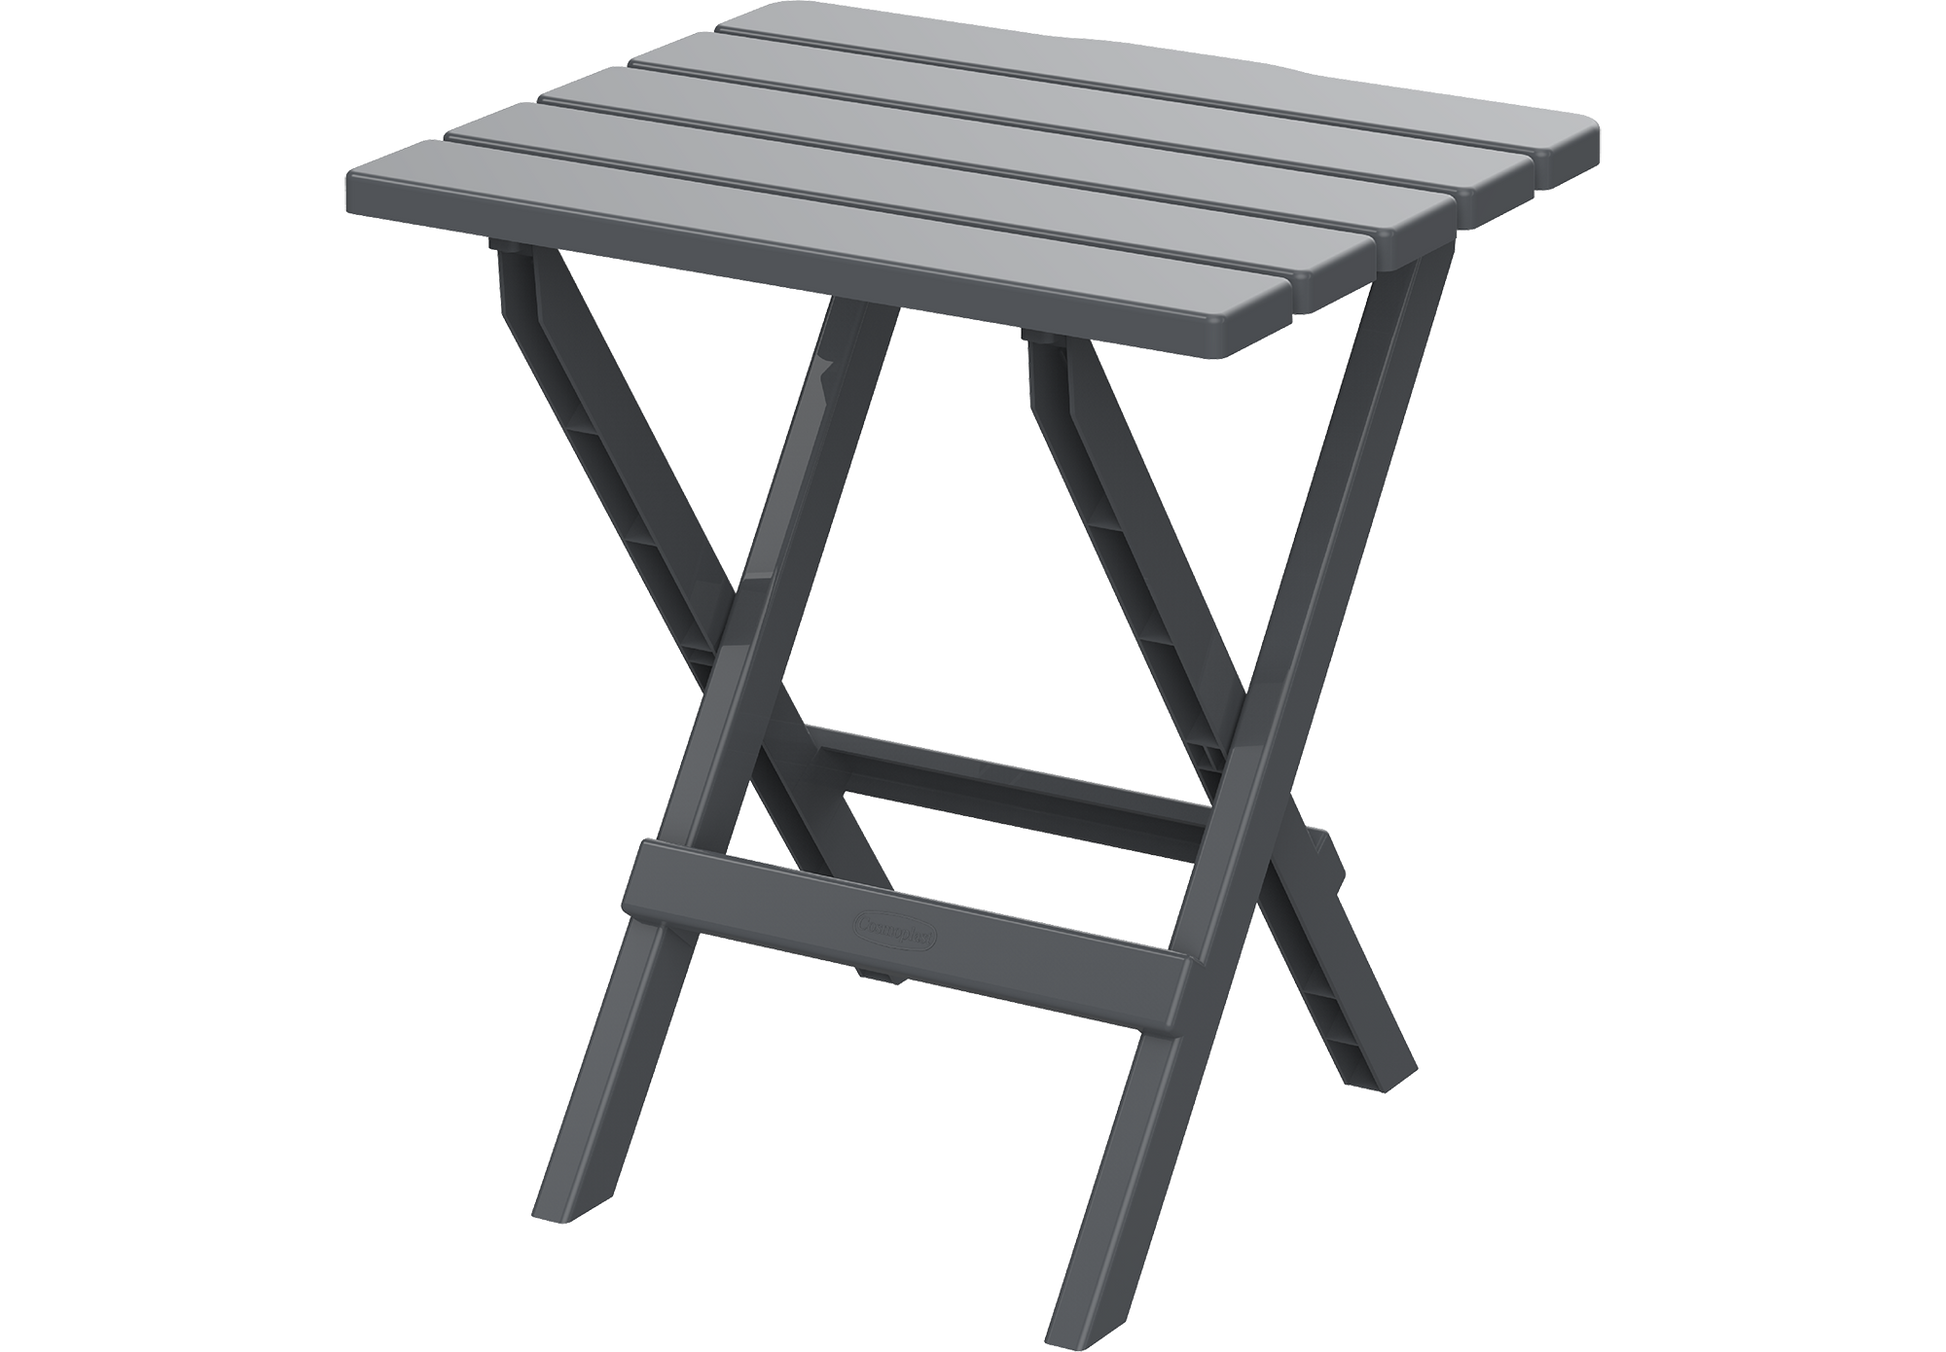 Portable Camping Folding Table